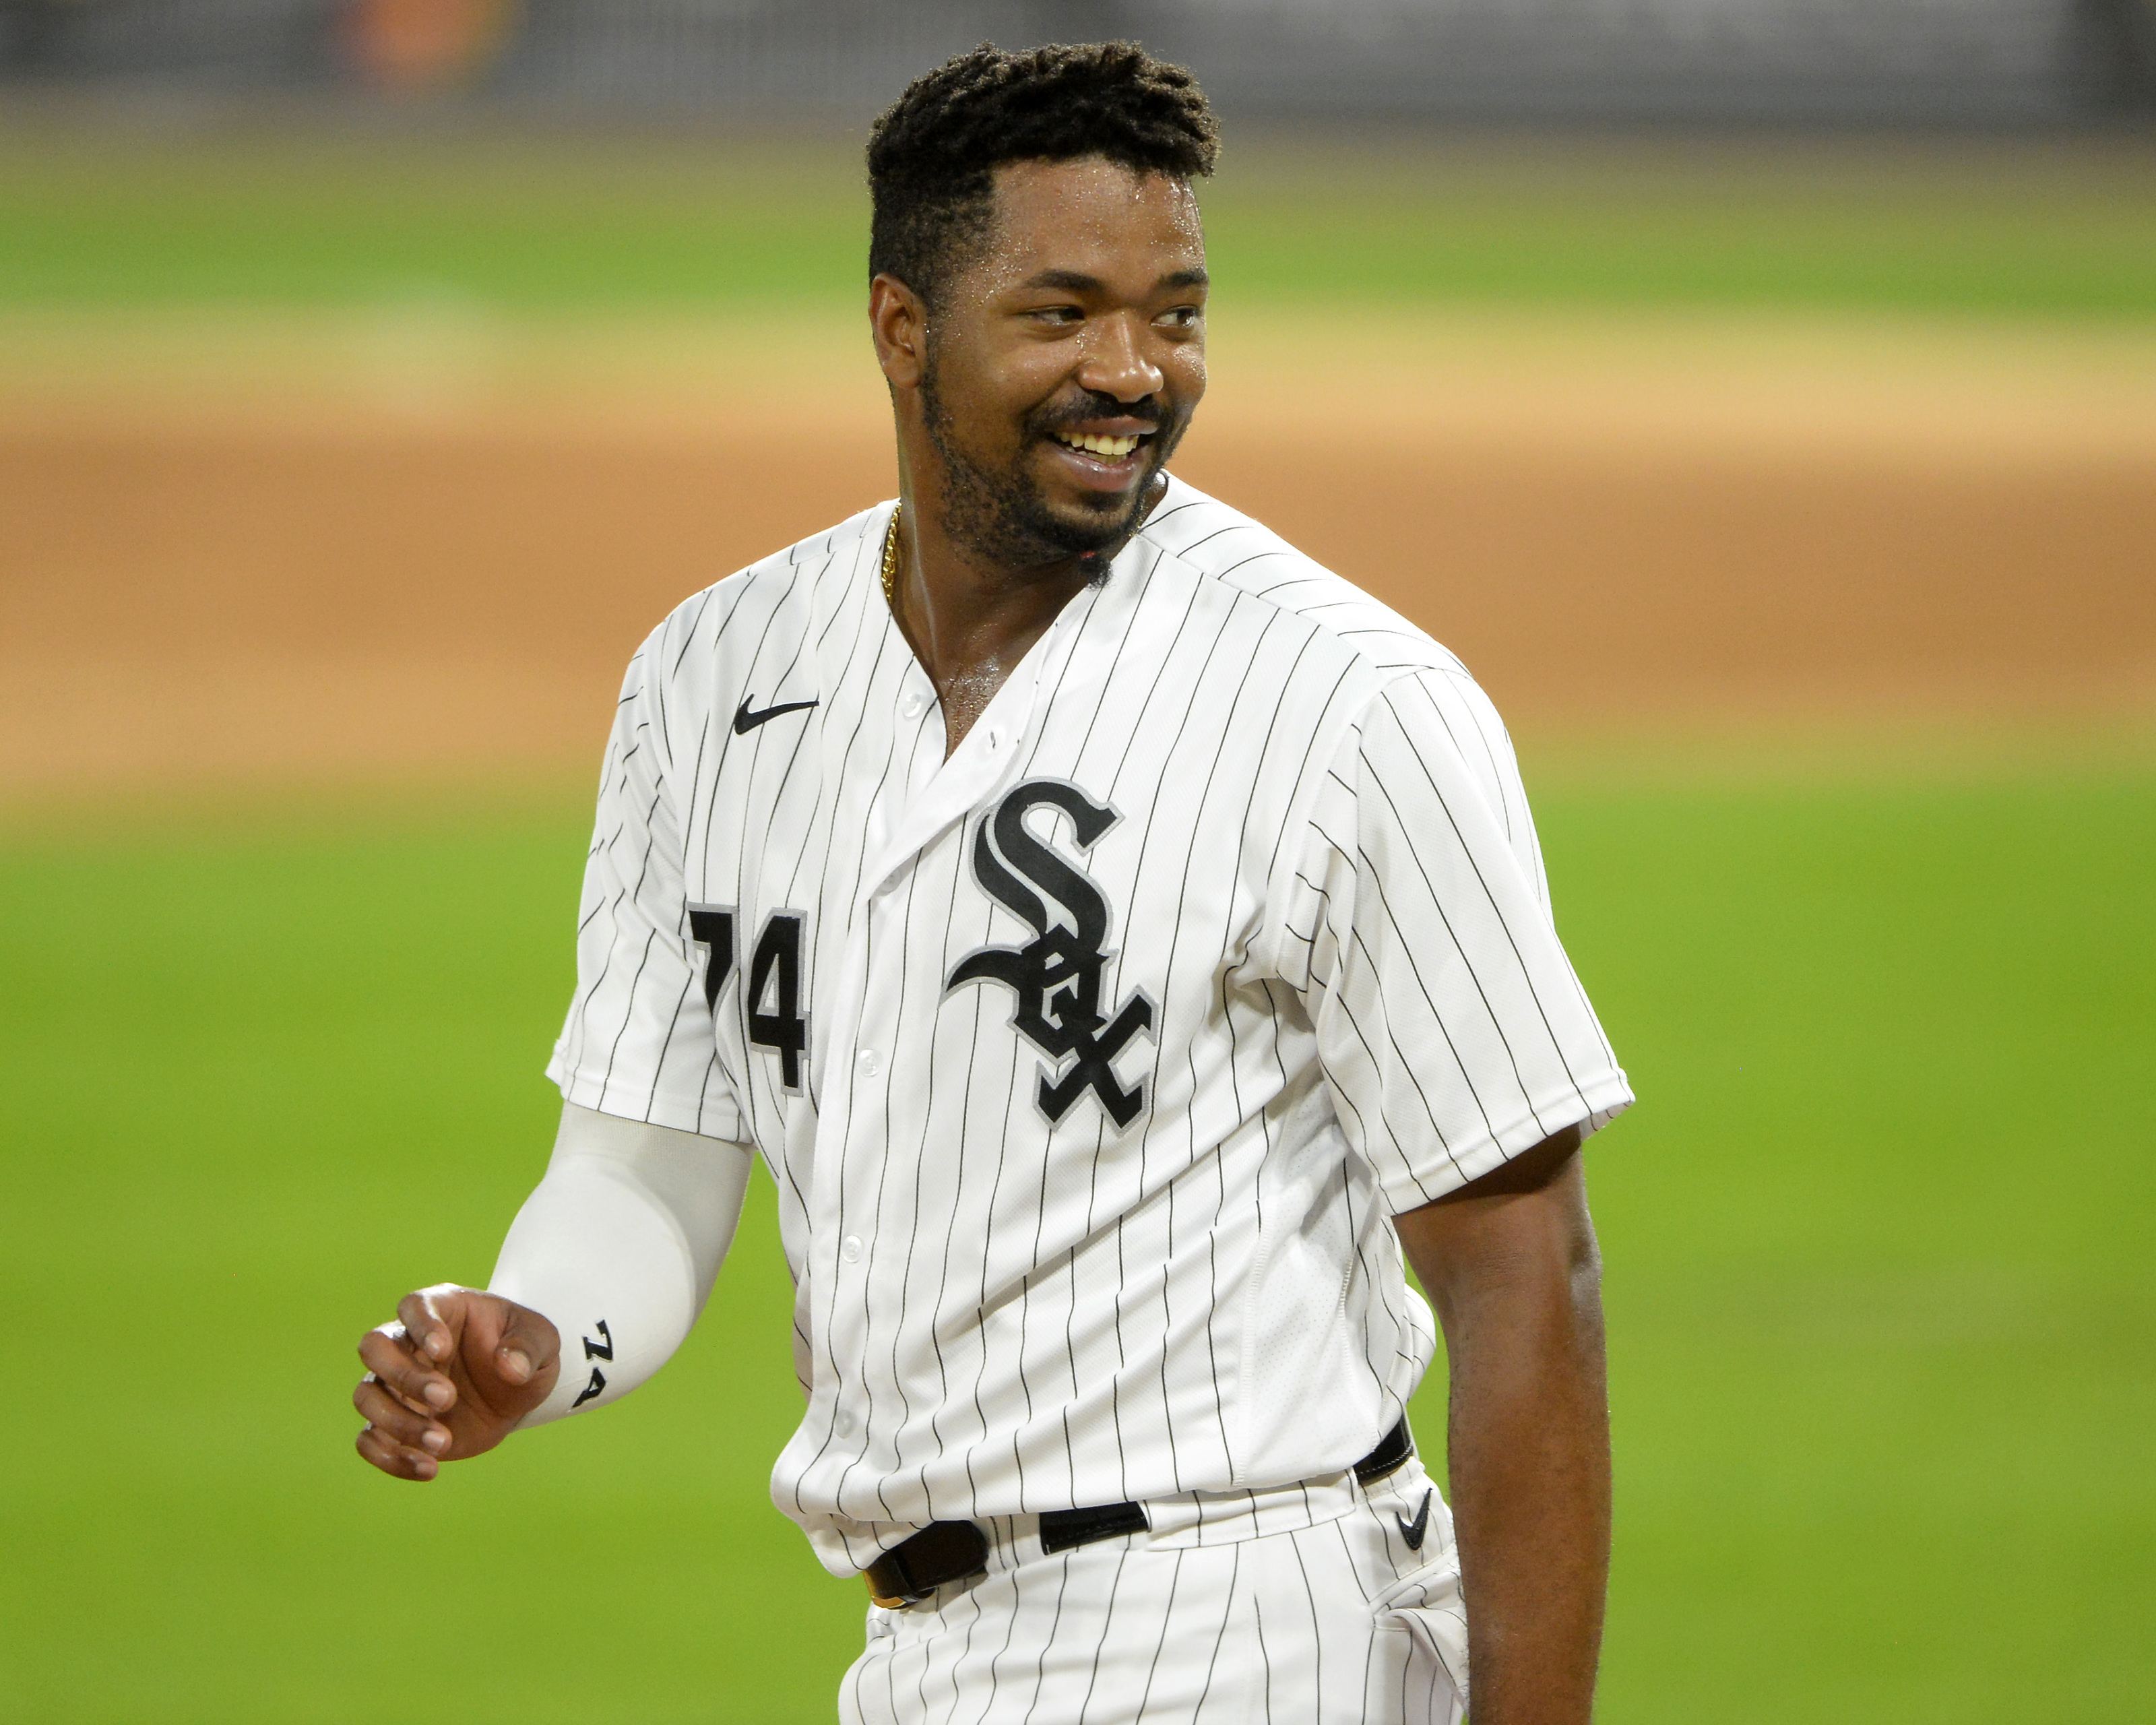 White Sox: Eloy Jimenez on the cusp of returning to team?